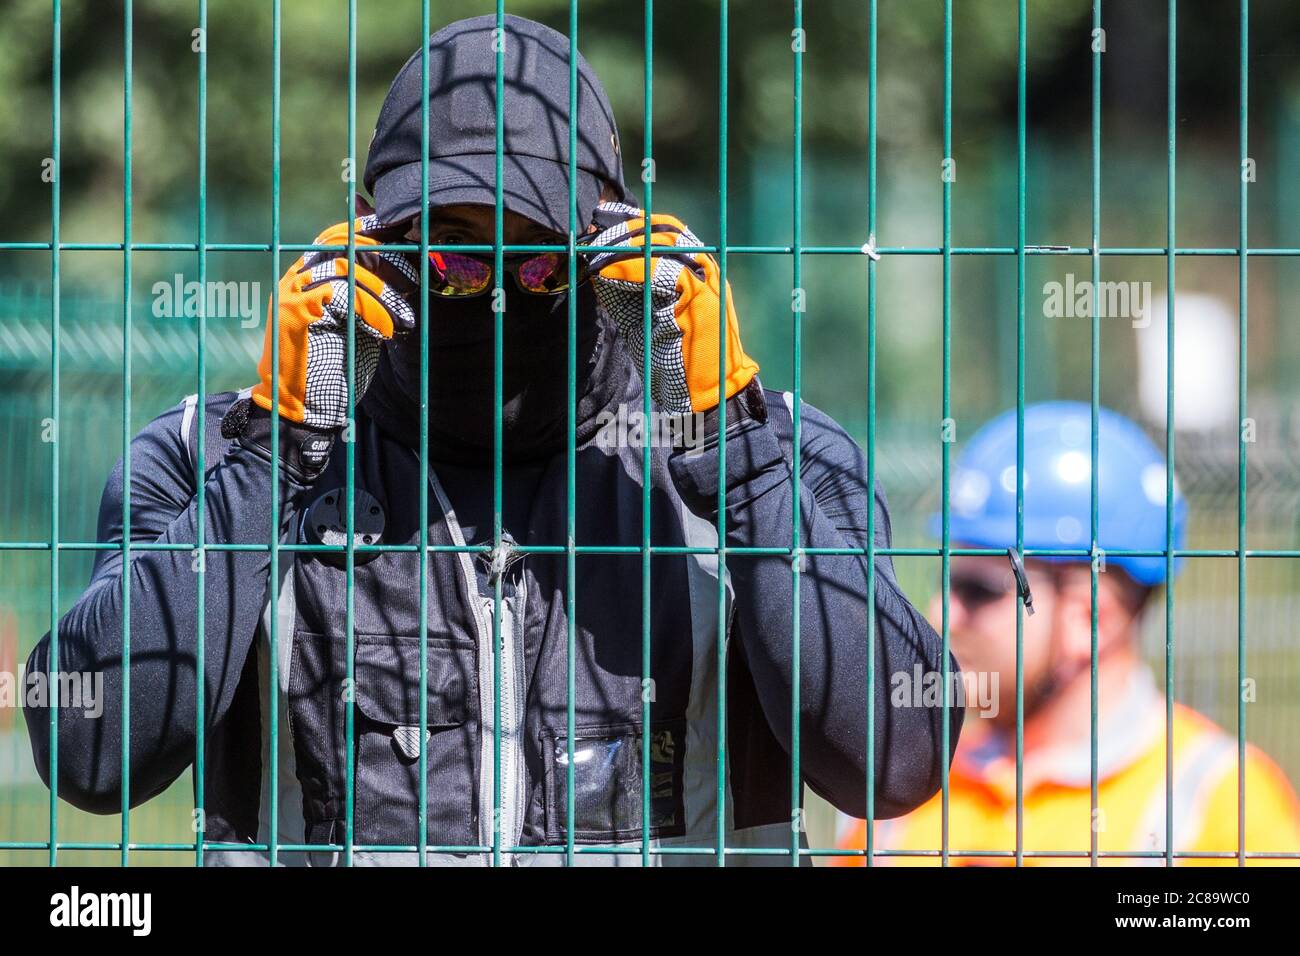 Harefield, UK. 22 July, 2020. A masked HS2 security guard observes a press photographer during works for the HS2 high-speed rail link close to Harvil Road. Environmental activists from HS2 Rebellion and Stop HS2 continue to protest against HS2, which is currently projected to cost £106bn and will remain a net contributor to CO2 emissions during its projected 120-year lifespan, from a series of wildlife protection camps along its route. Credit: Mark Kerrison/Alamy Live News Stock Photo